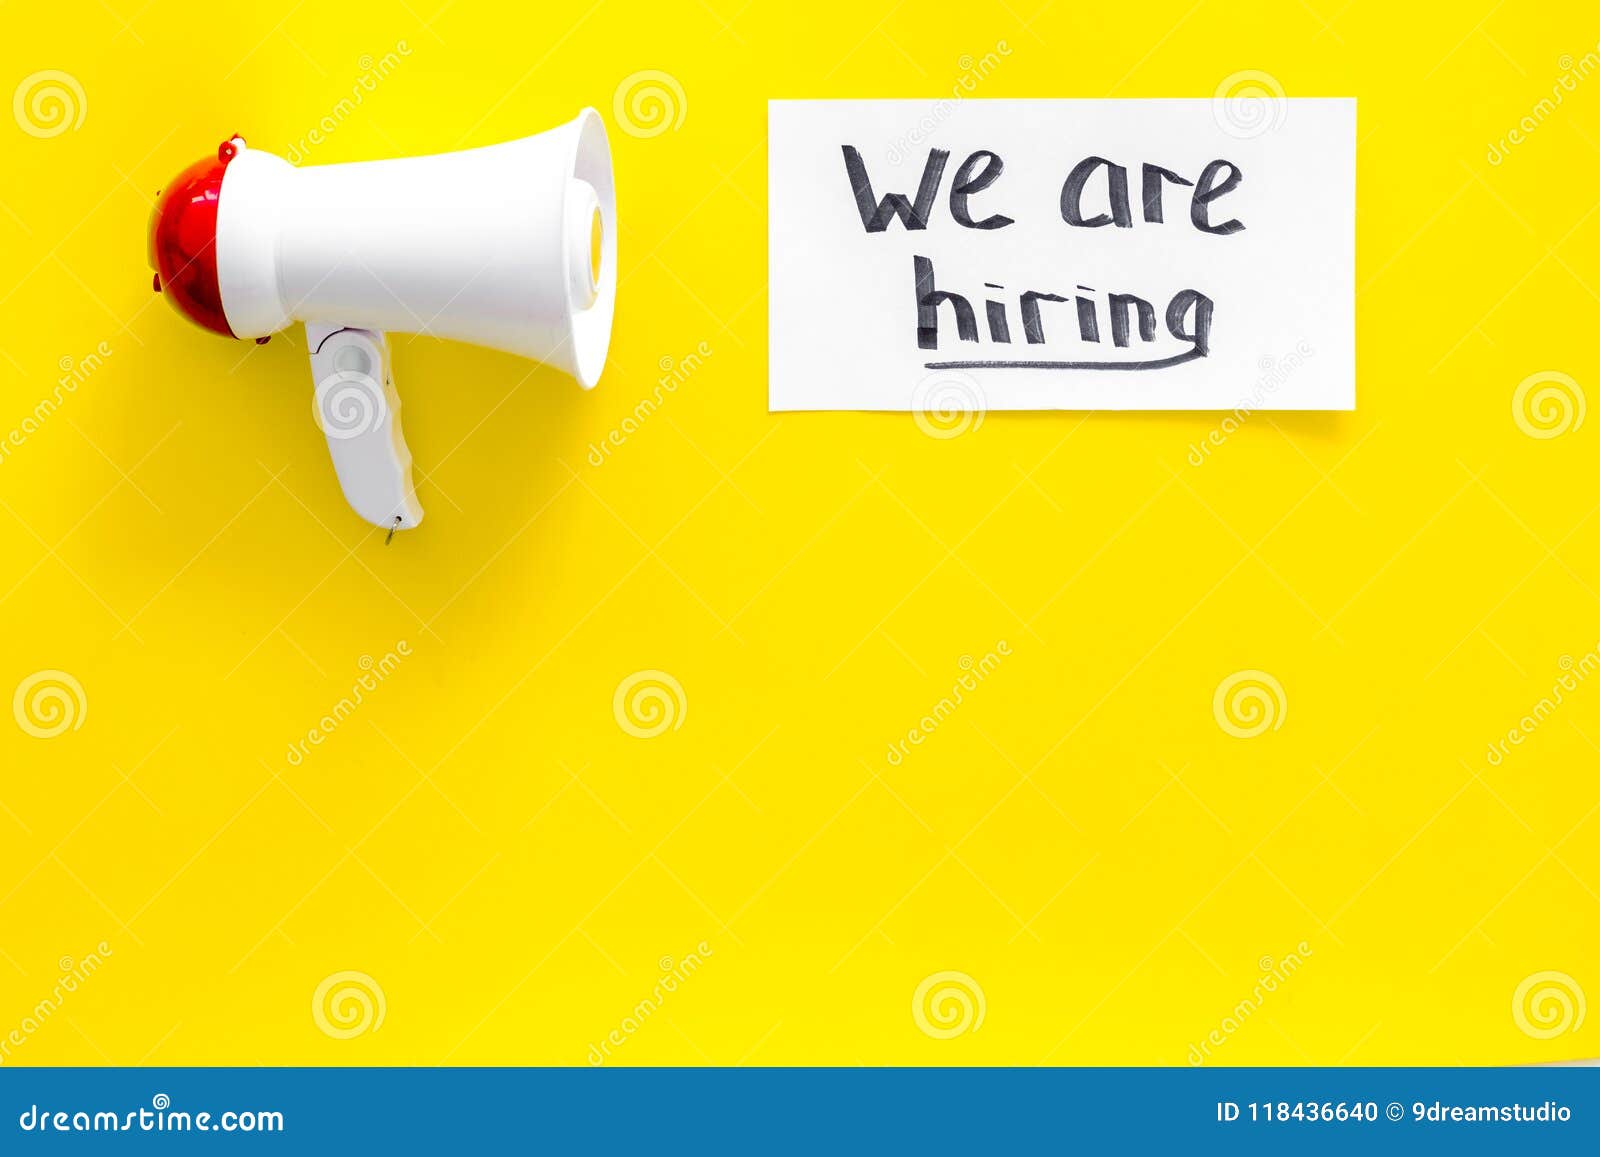 Job Recruiting Advertisement. we are Hiring Lettering Near Megaphone on  Yellow Background Top View Copy Space Stock Photo - Image of employment,  copy: 118436640